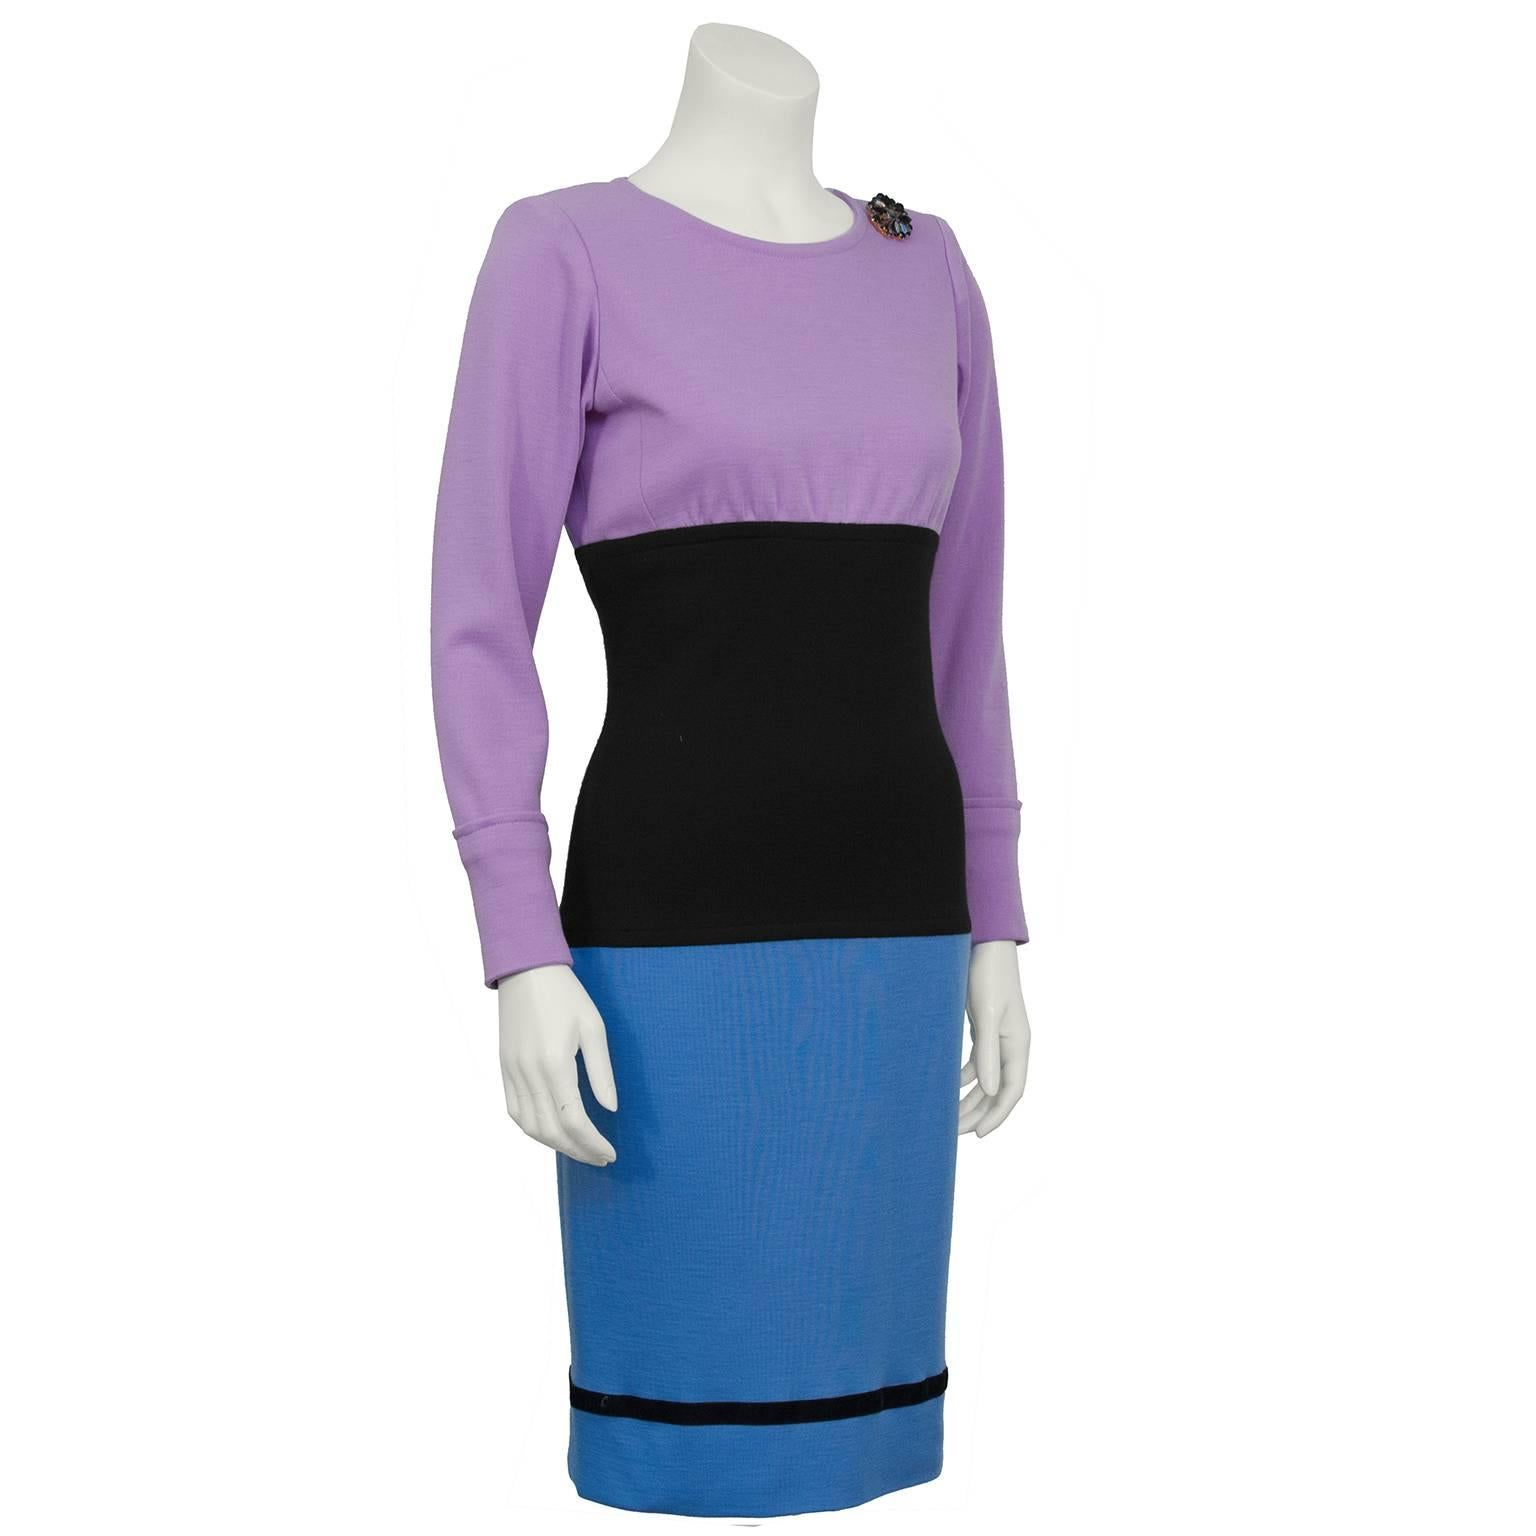 Yves Saint Laurent YSL colorblock day dress from the 1980's. Lavender bust and long sleeves, black waist and light blue skirt. The wool jersey dress is fitted through the waist with banded cuffs, four black buttons up the back and black and gold